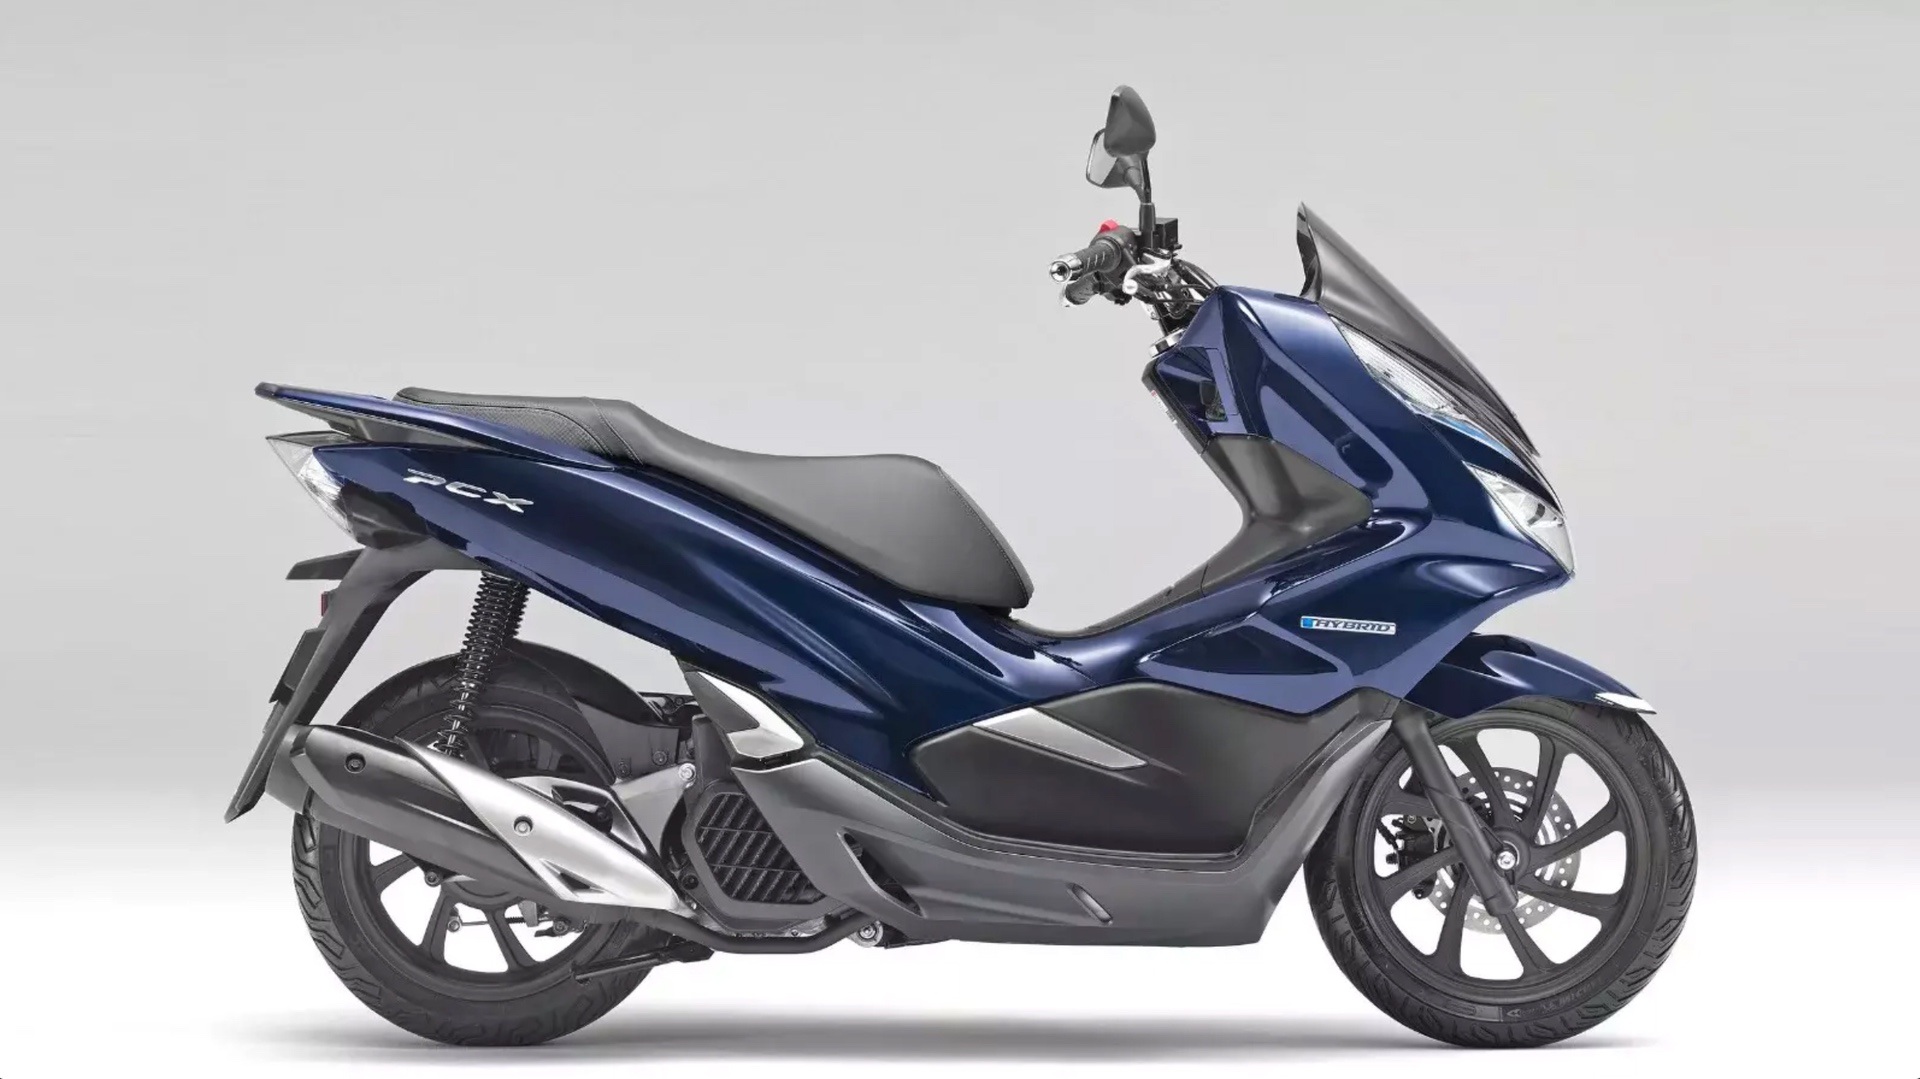  A Honda PCX125 Hybrid scooter from 2018